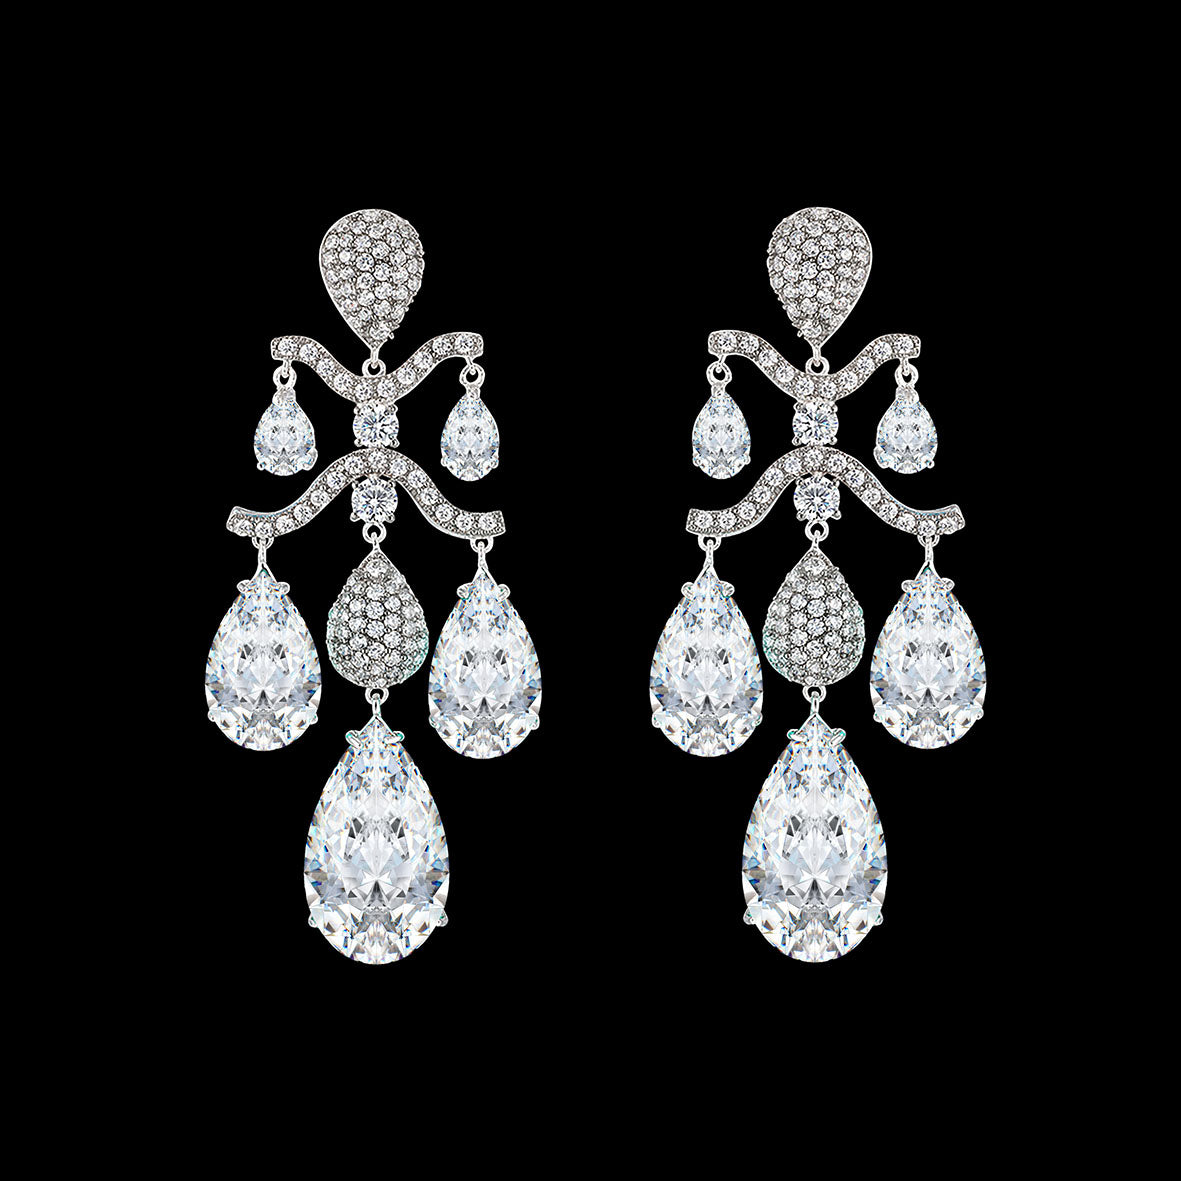 Earrings Collection for Jewelry